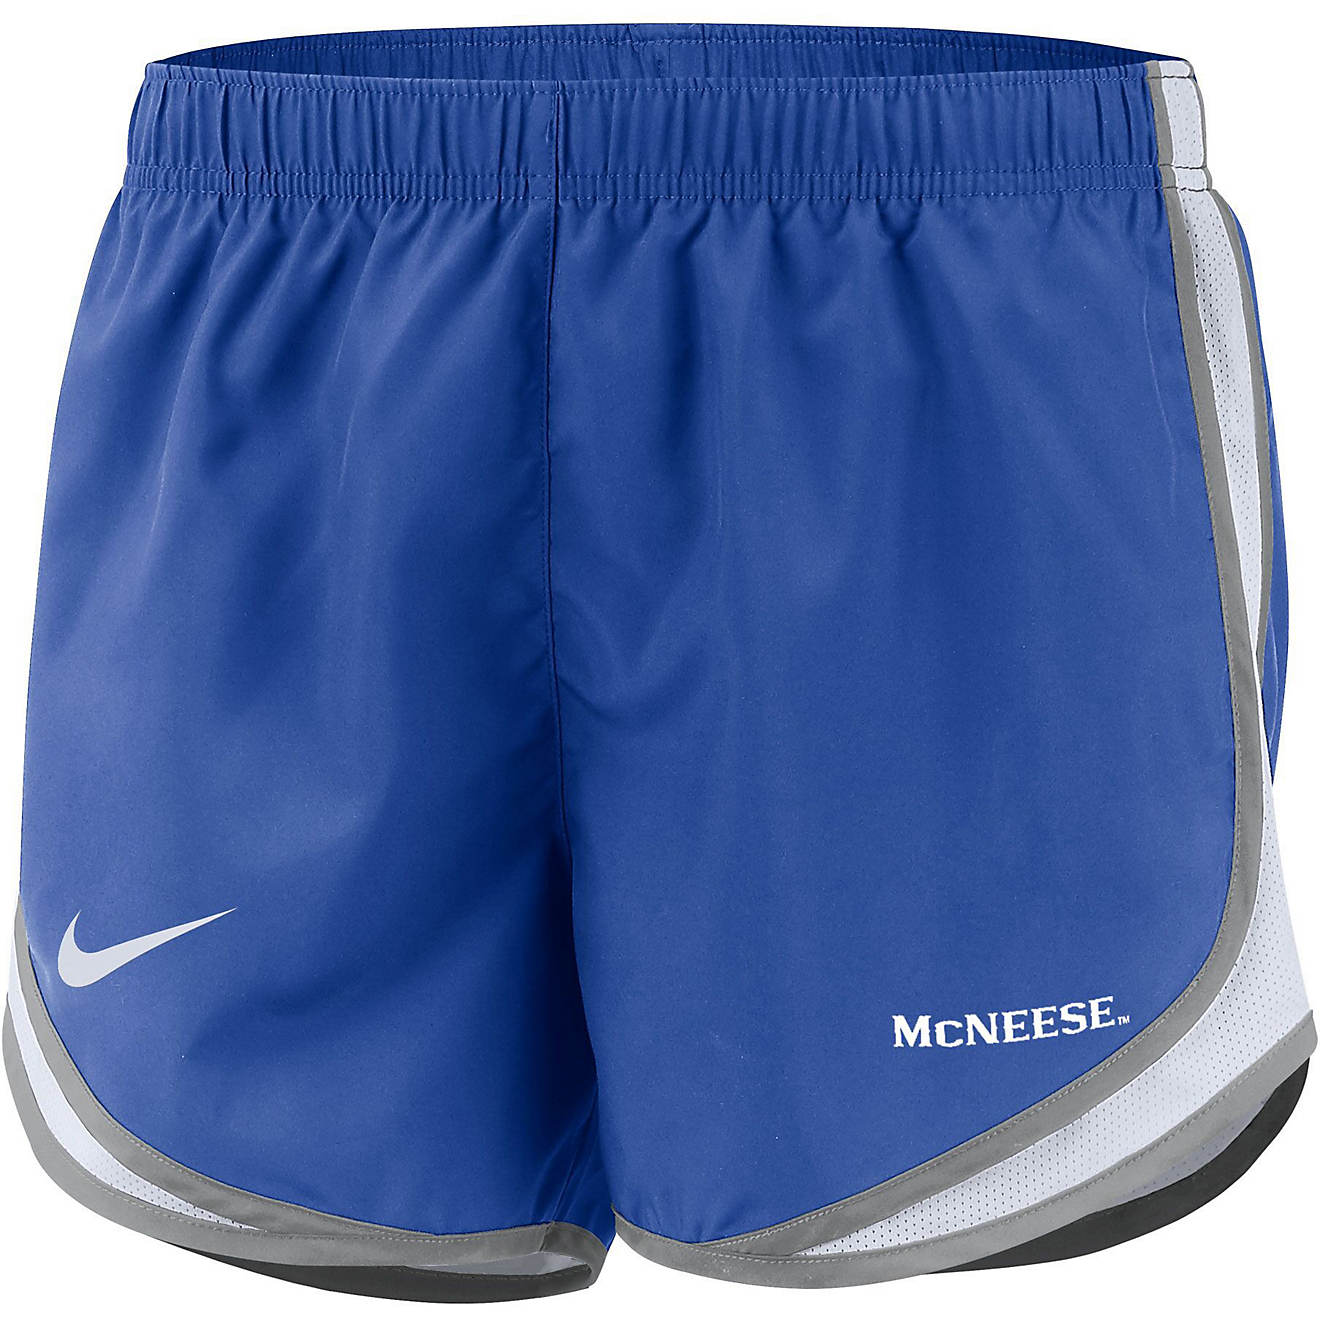 Nike Women's McNeese State University Fanwear Tempo Shorts                                                                       - view number 1